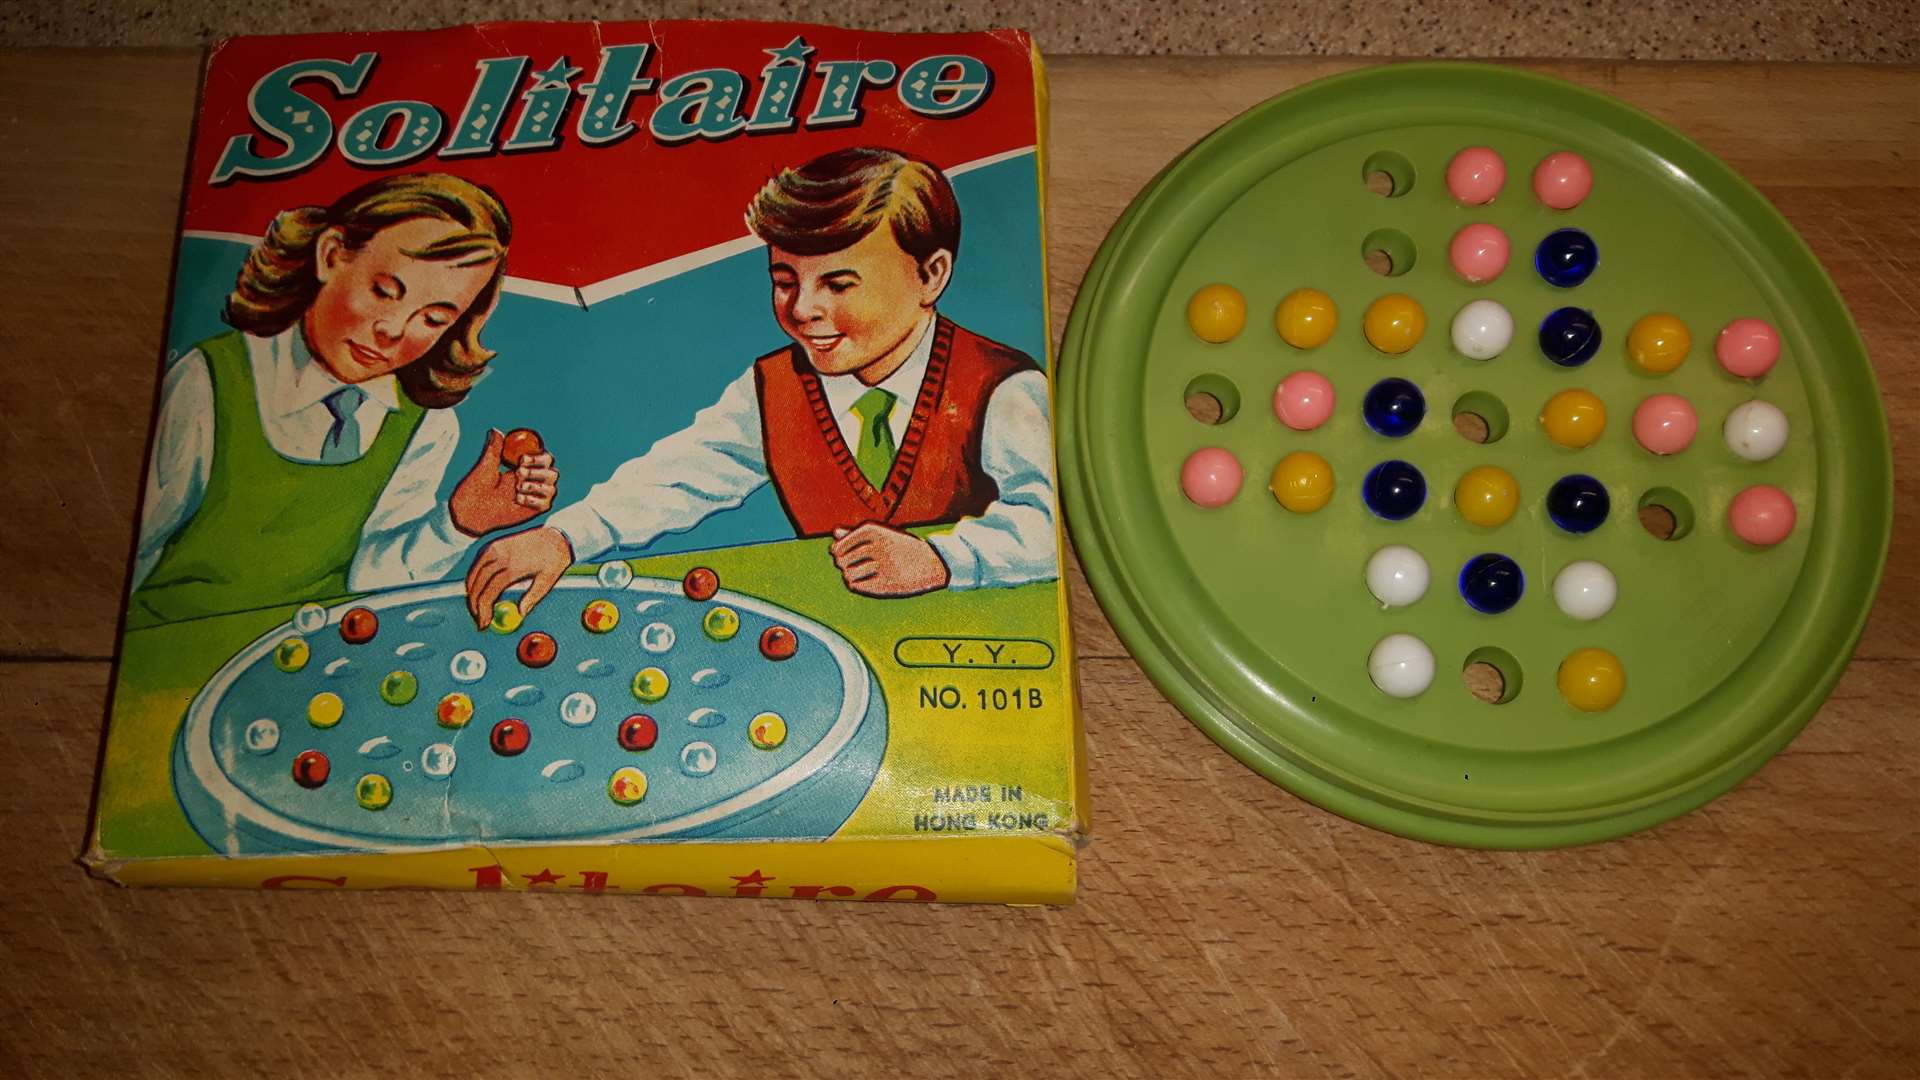 A Solitaire game from the 1960s